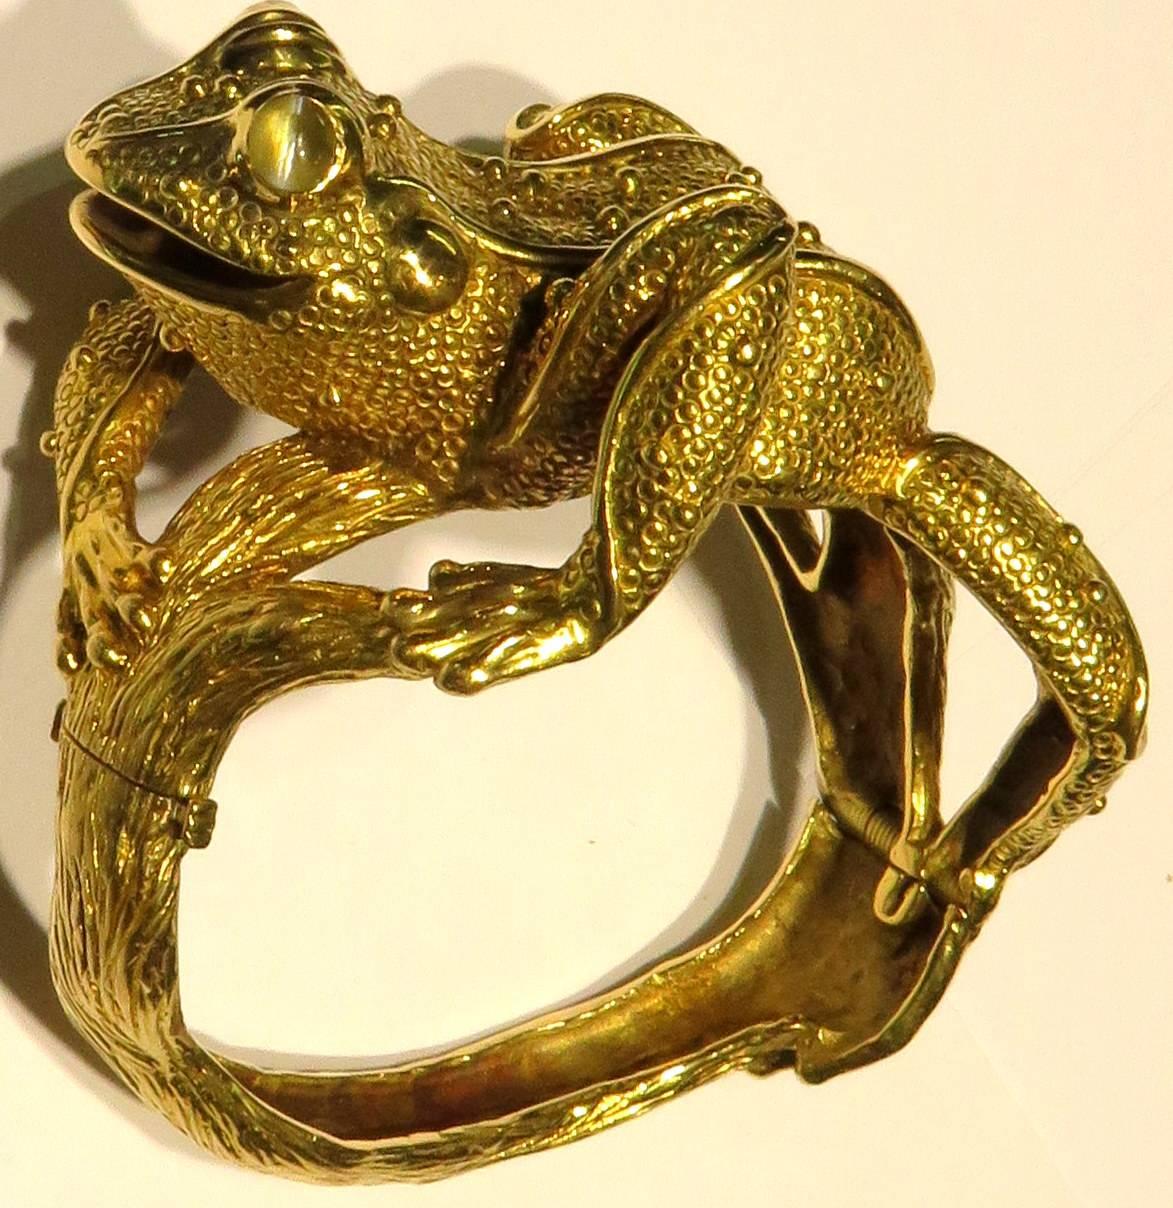 You will never feel alone when wearing this amazing frog bracelet. This 18K gold hinged bangle bracelet is by Craig Drake. He is absolutely life size with incredible detail. His eyes are chrysoberyl cats eyes with such a strong sharp realistic eye